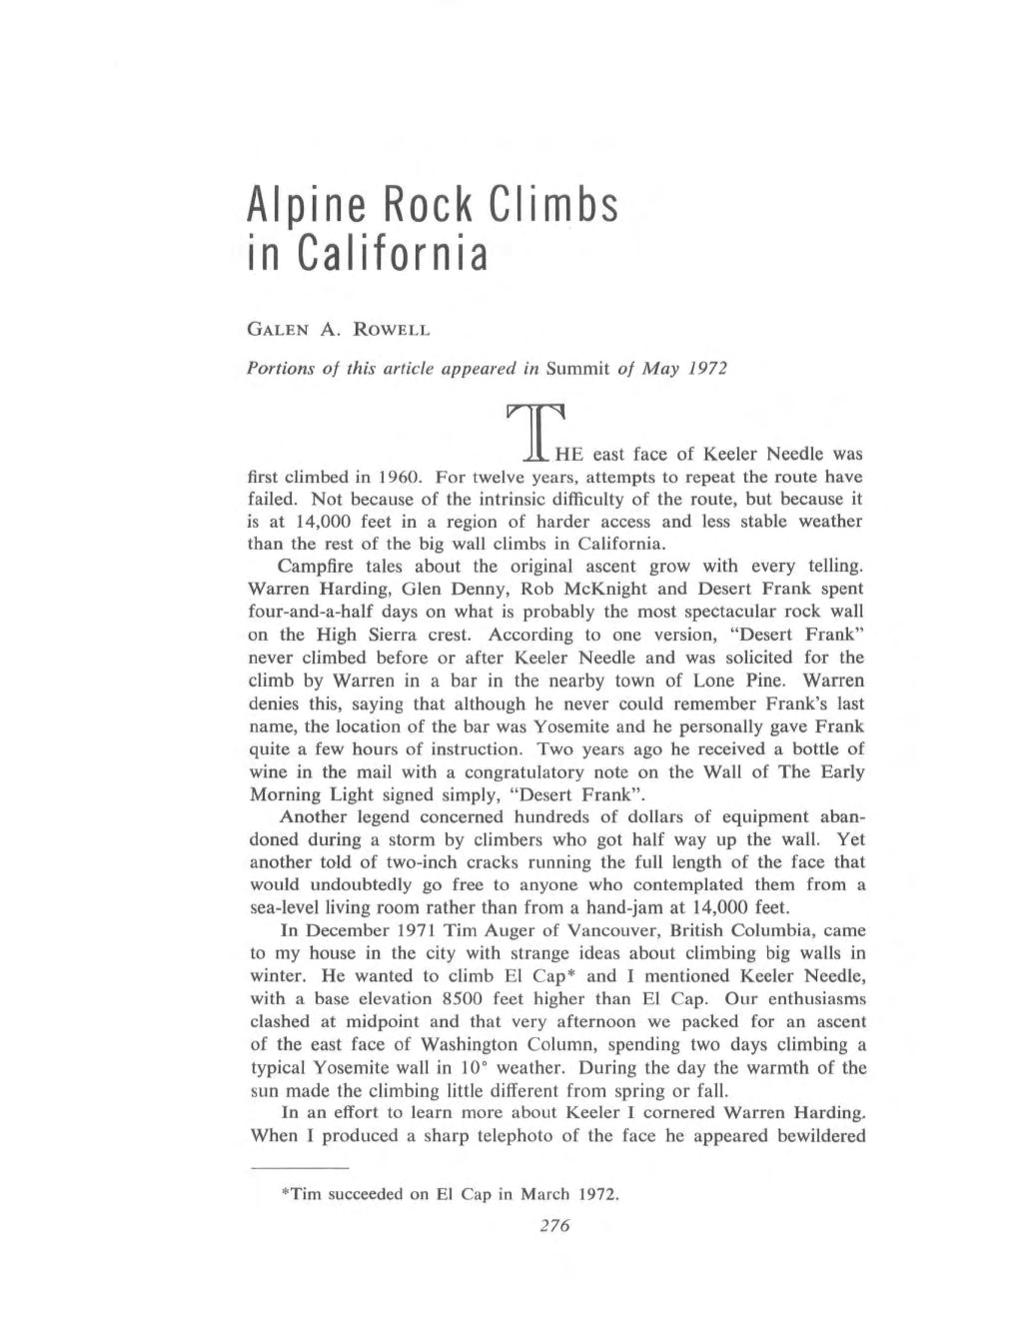 Alpine Rock Climbs in California GALEN A. ROWELL Portions of this article appeared in Summit of May 1972 T HE east face of Keeler Needle was first climbed in 1960.